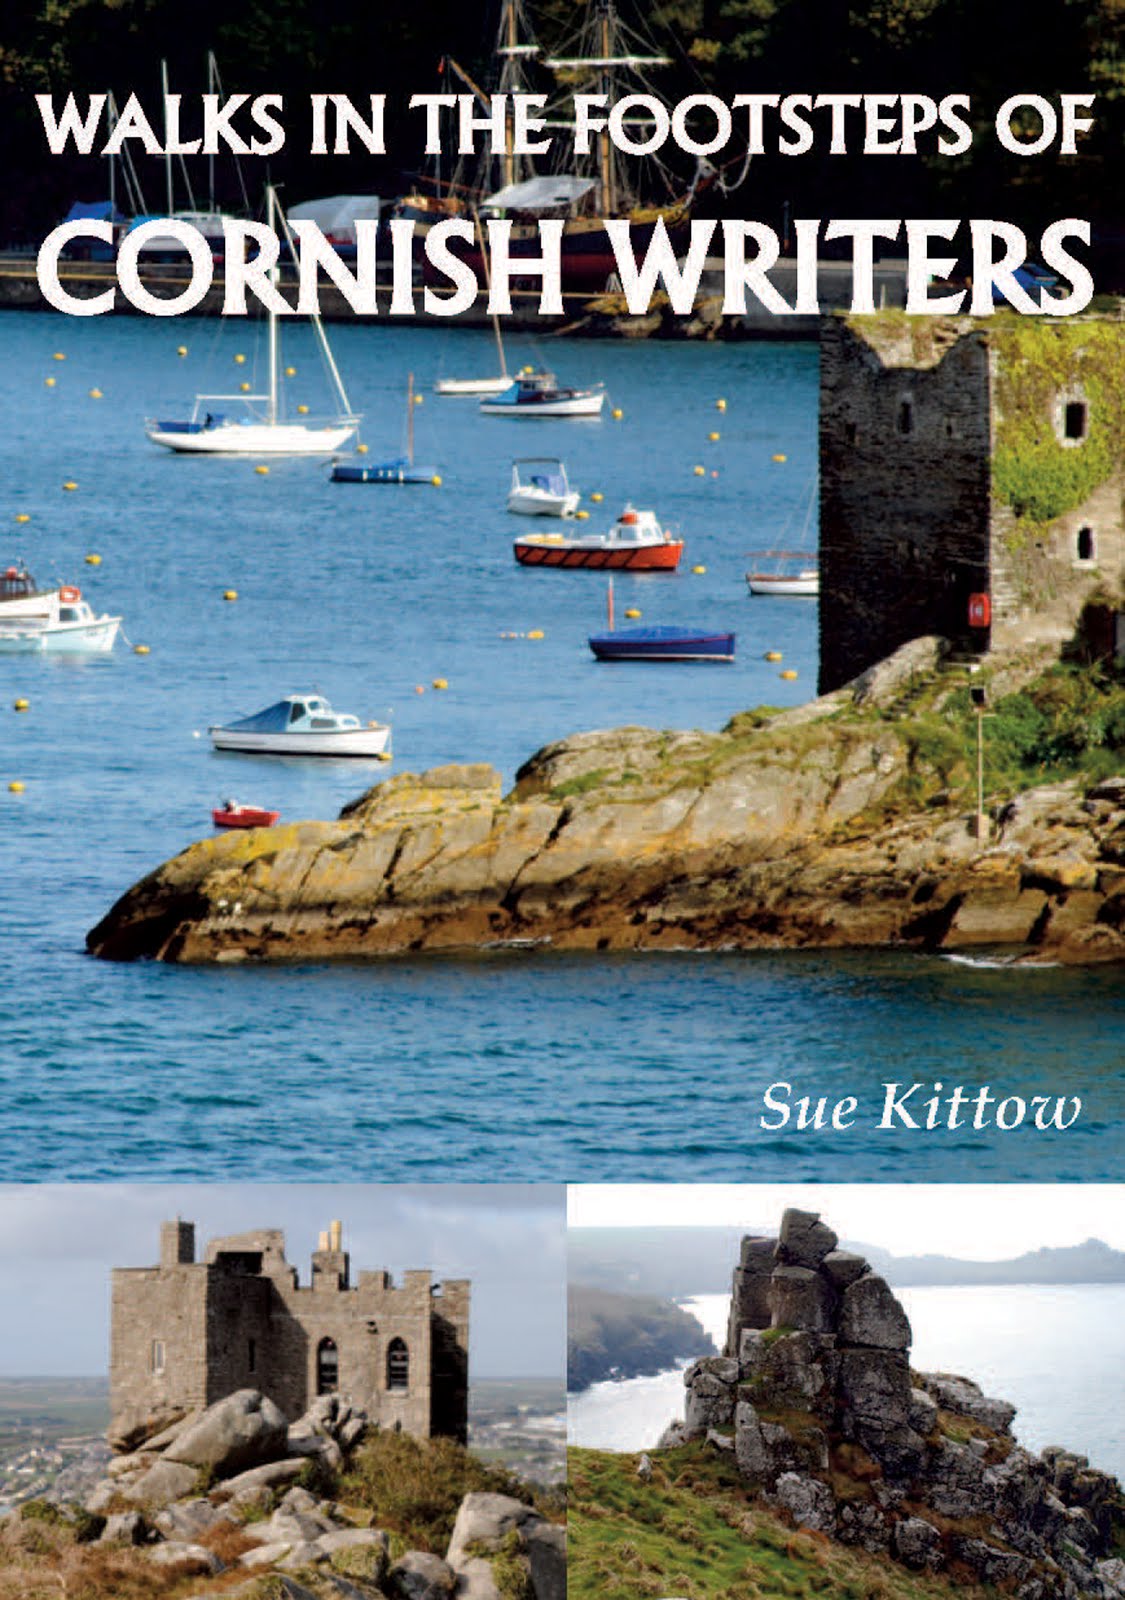 Walks in the Footsteps of Cornish Writers